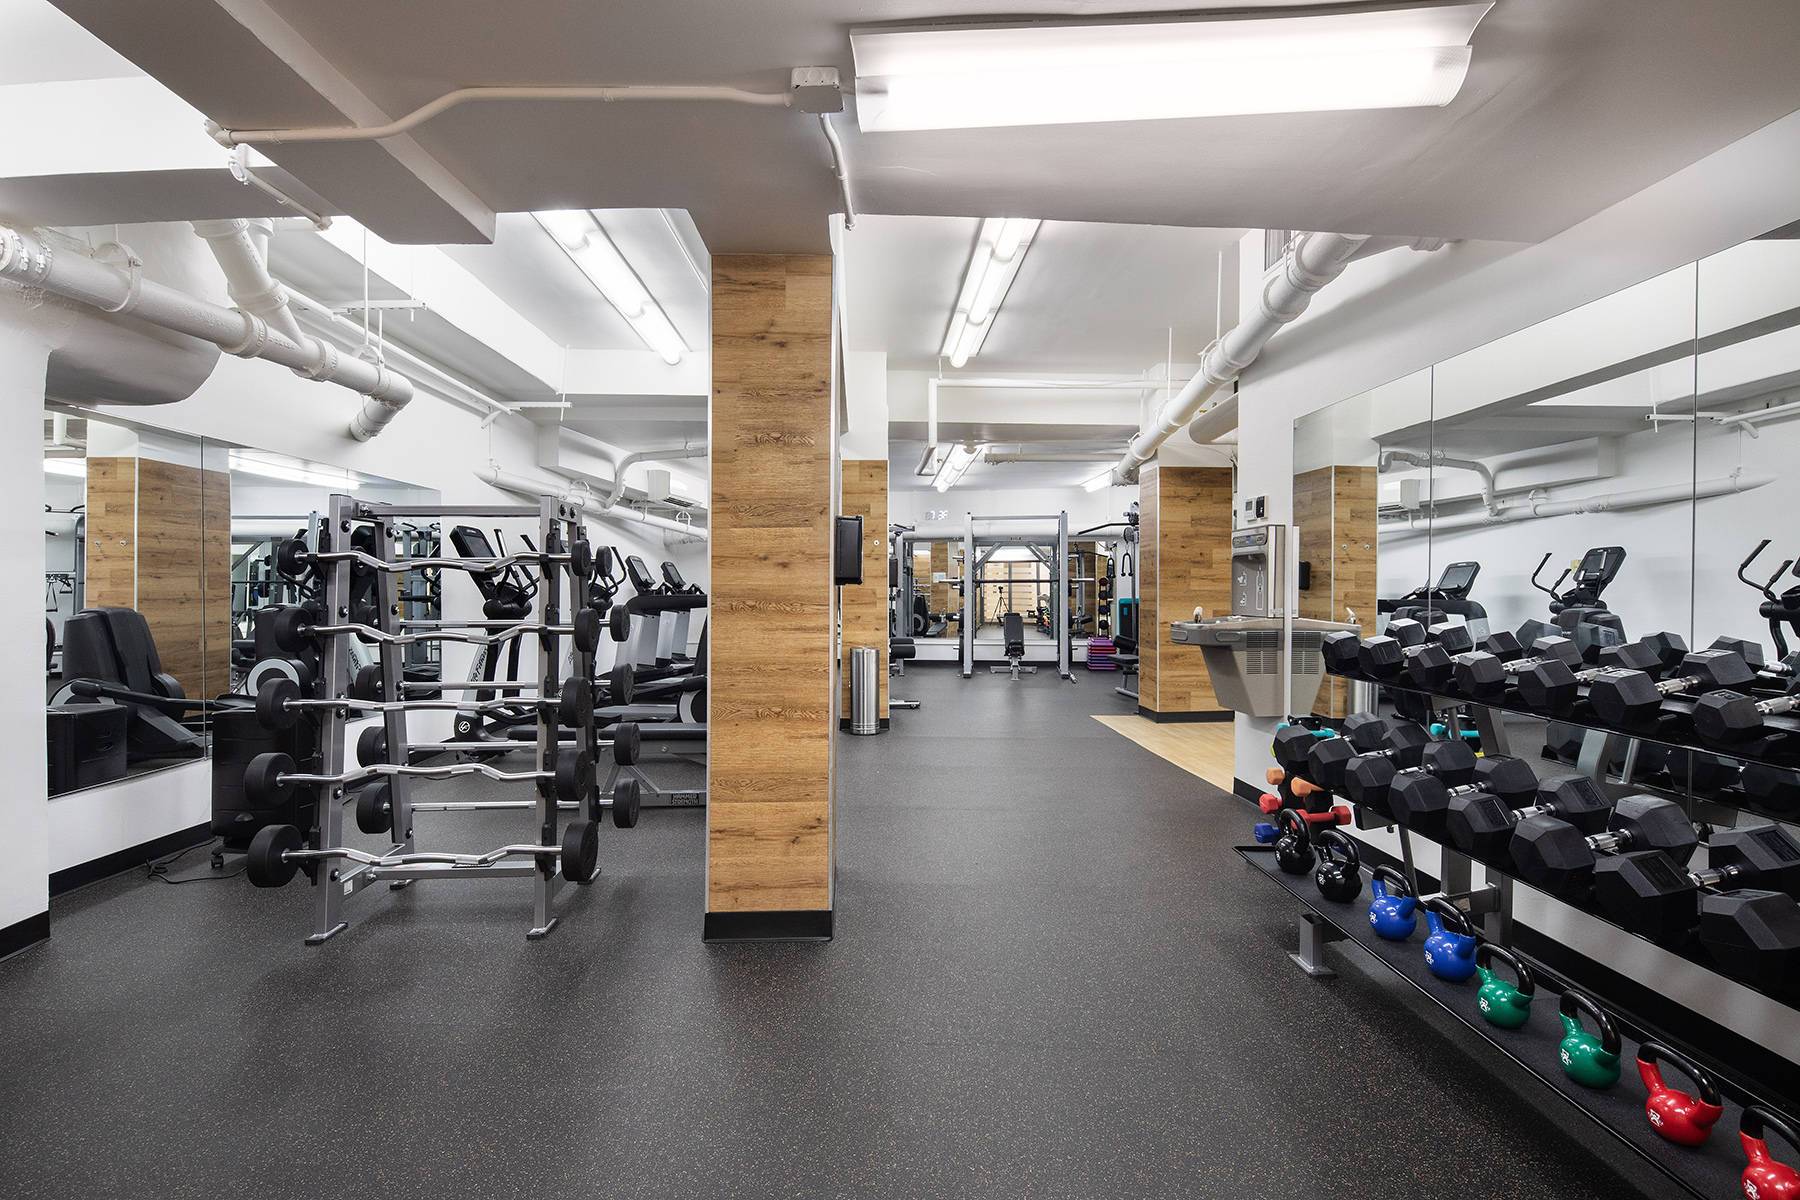 Spacious fitness center with numerous weights, lifting areas, equipment and mirrored walls